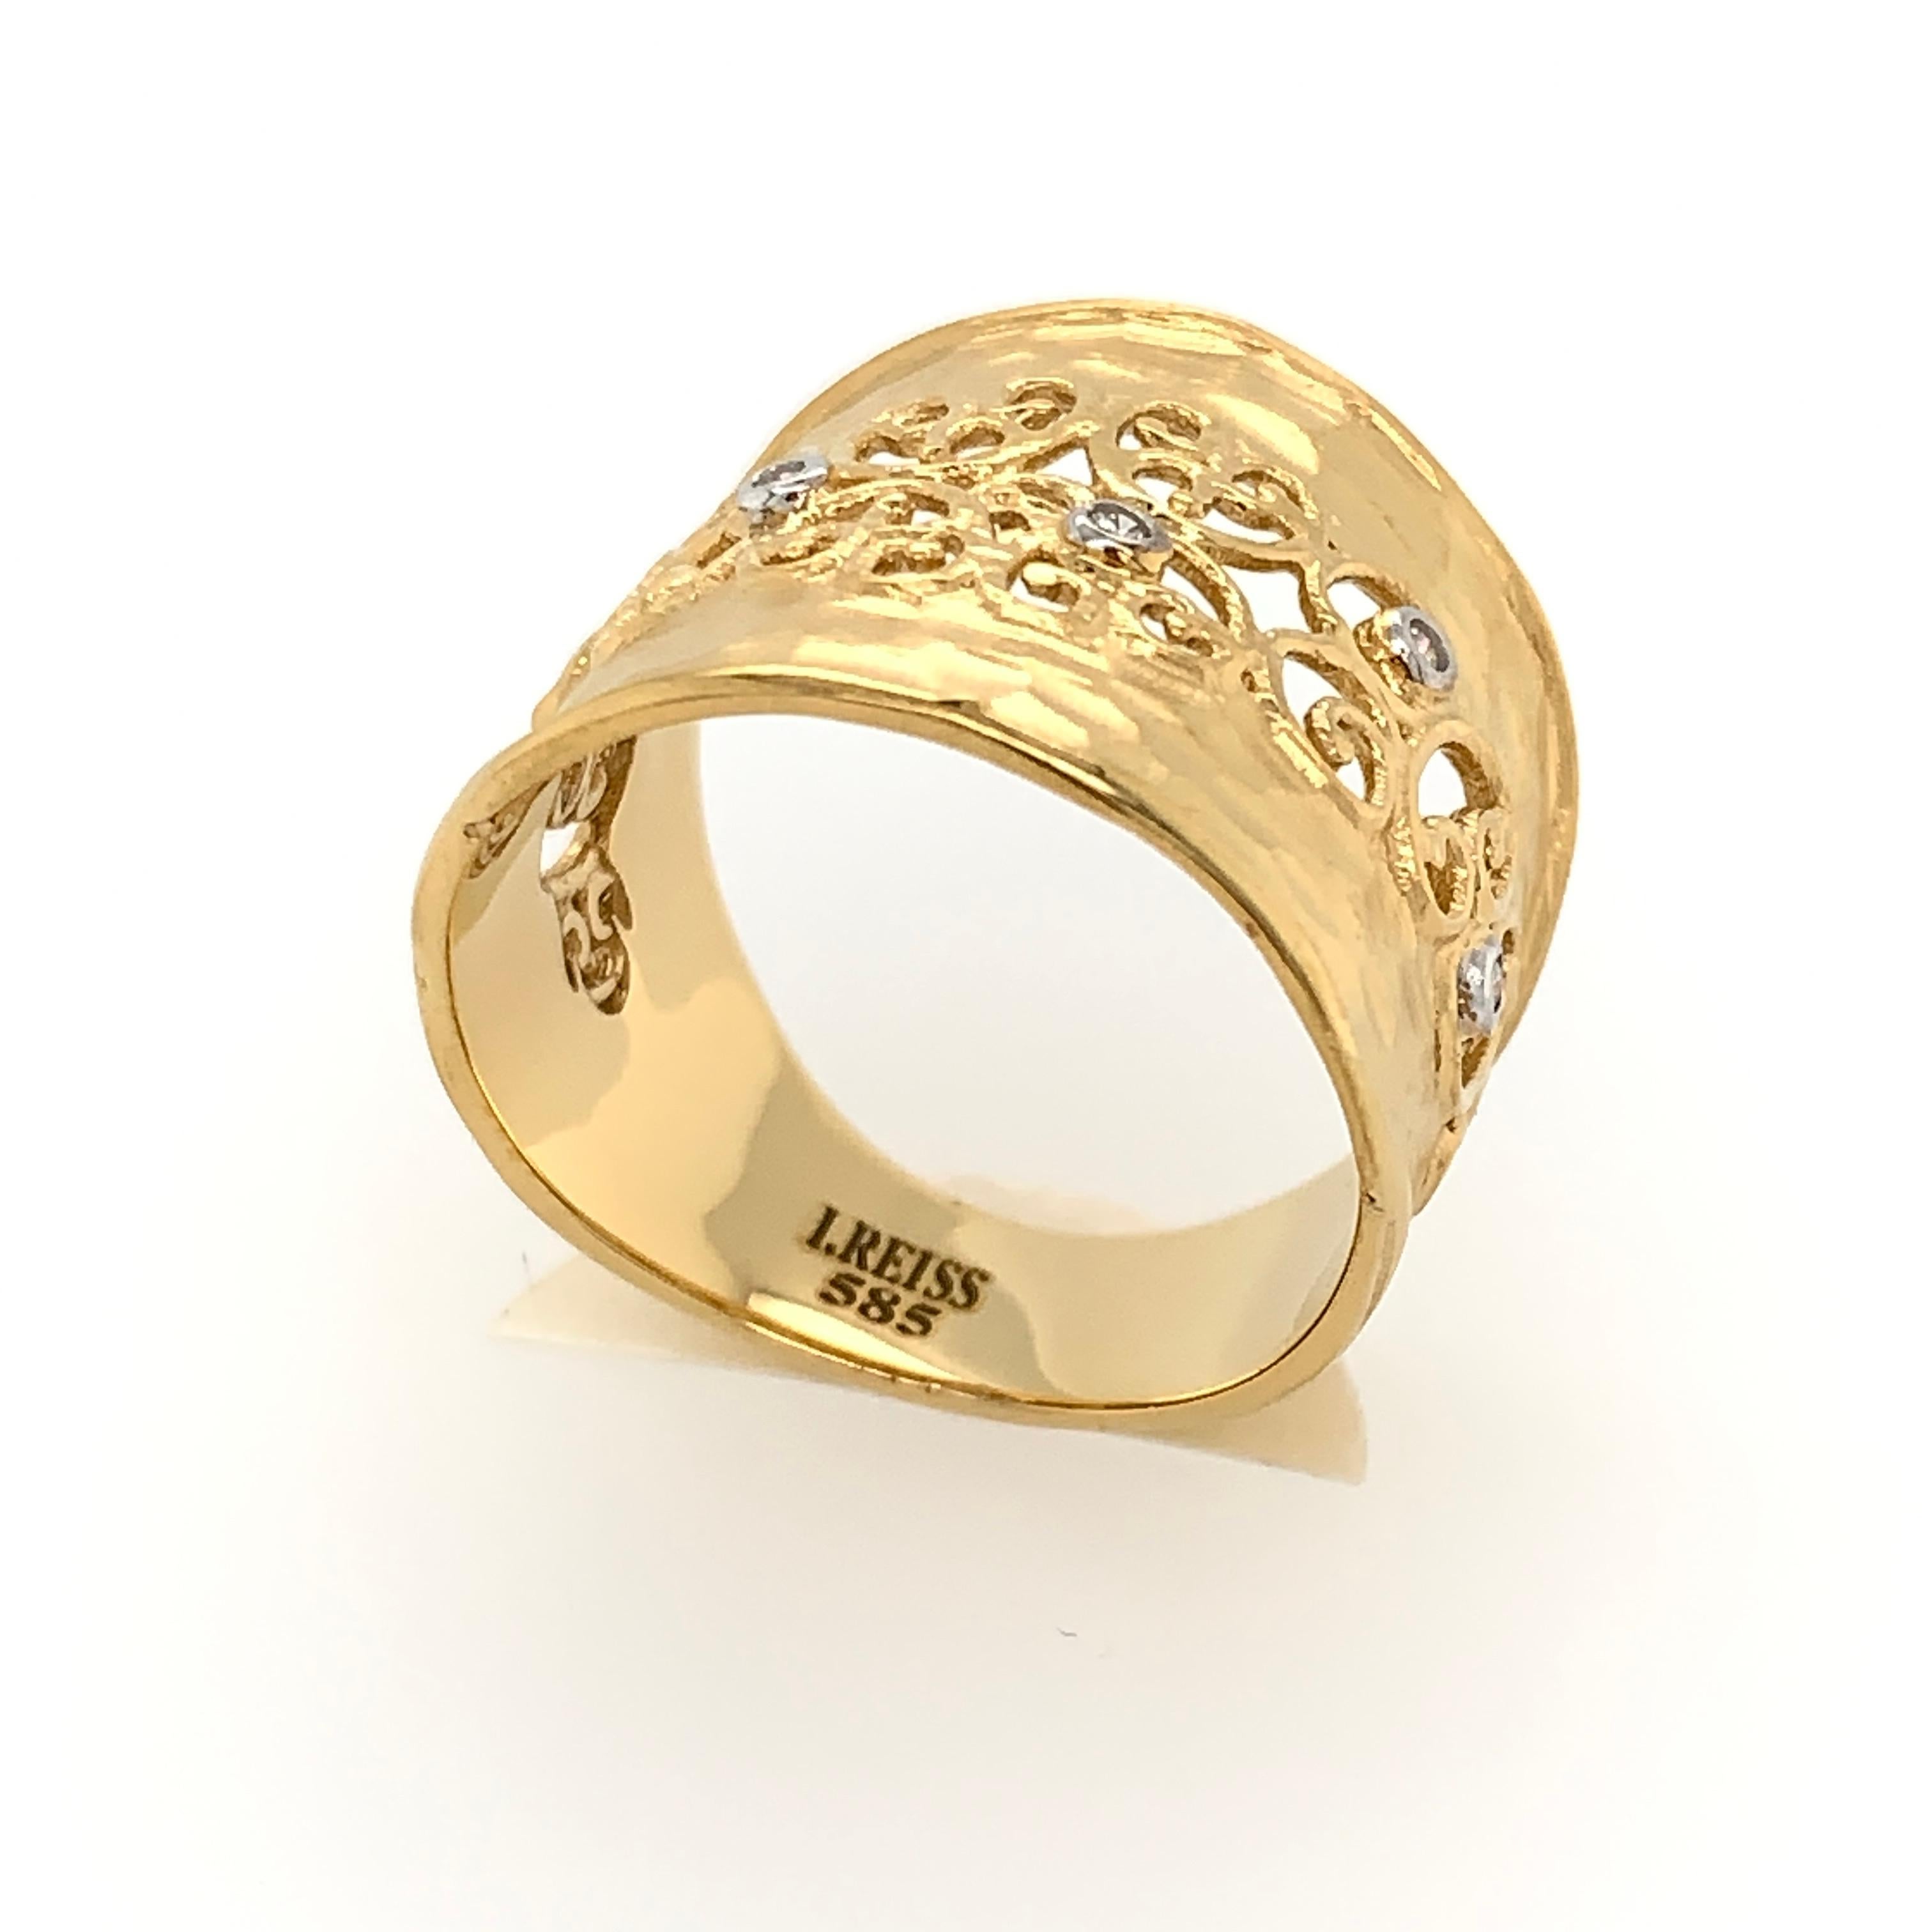 For Sale:  Handcrafted 14 Karat Yellow Gold Hammered Filigree Cigar Ring 4